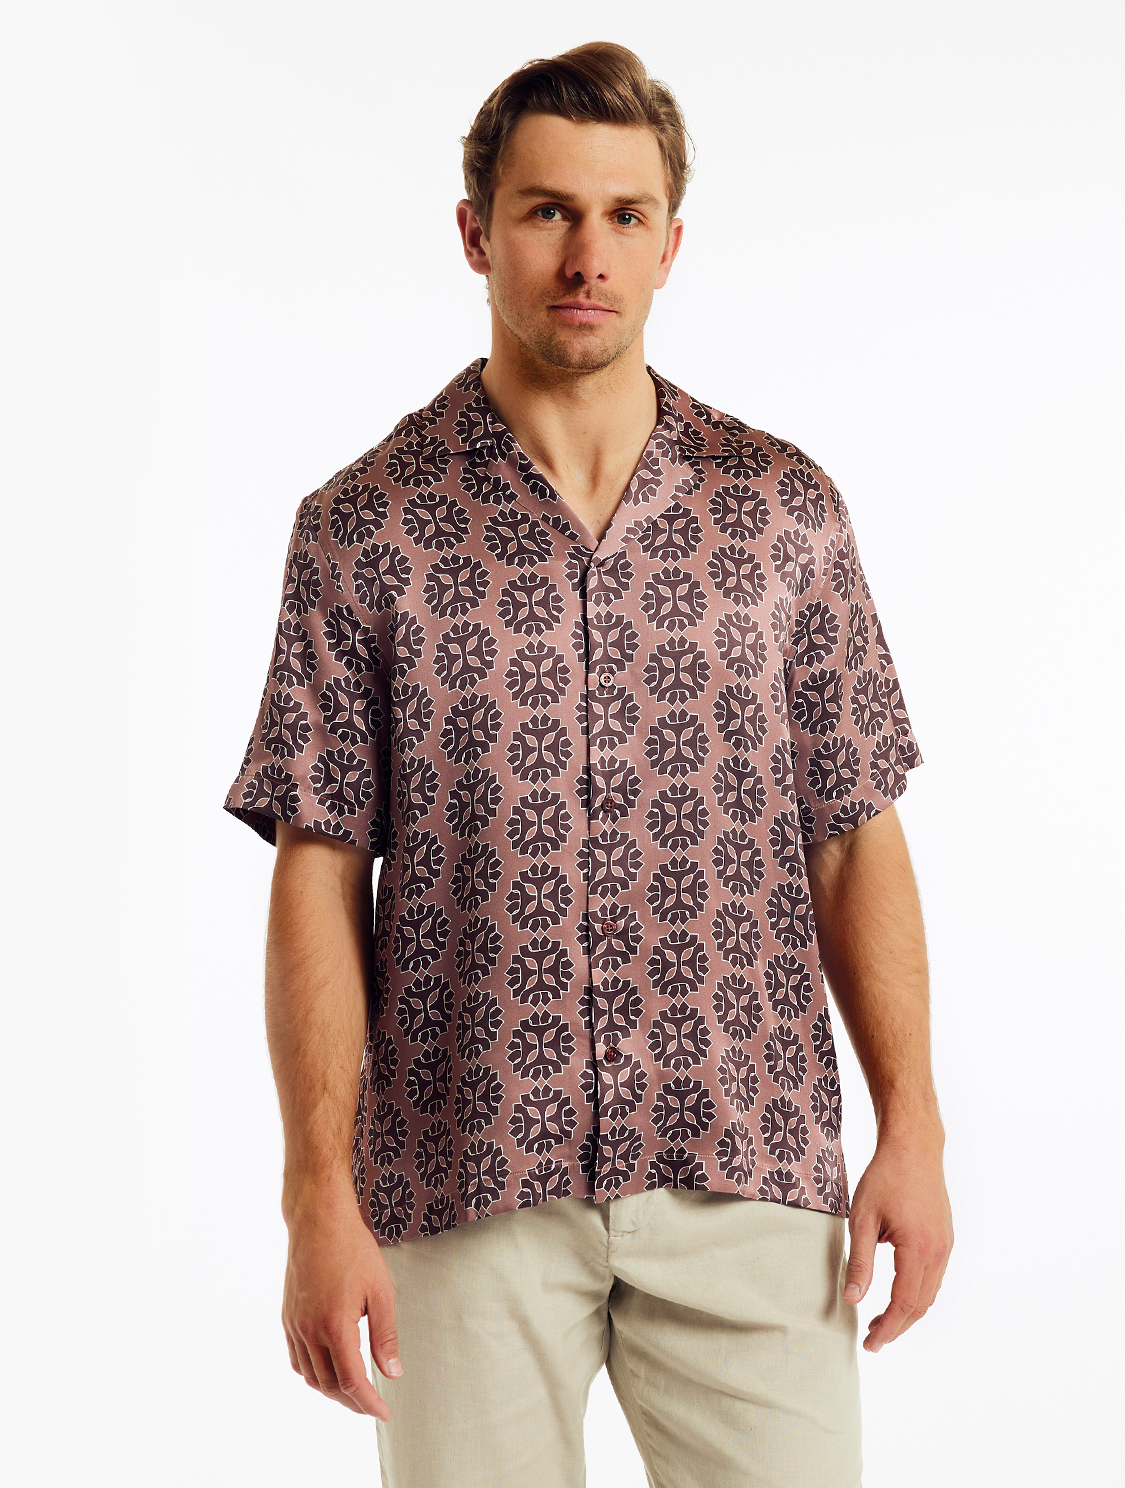 Louis Vuitton LV Brown Hawaii Shirt Shorts Set Luxury Beach Clothing  Clothes Outfit For Men HT in 2023